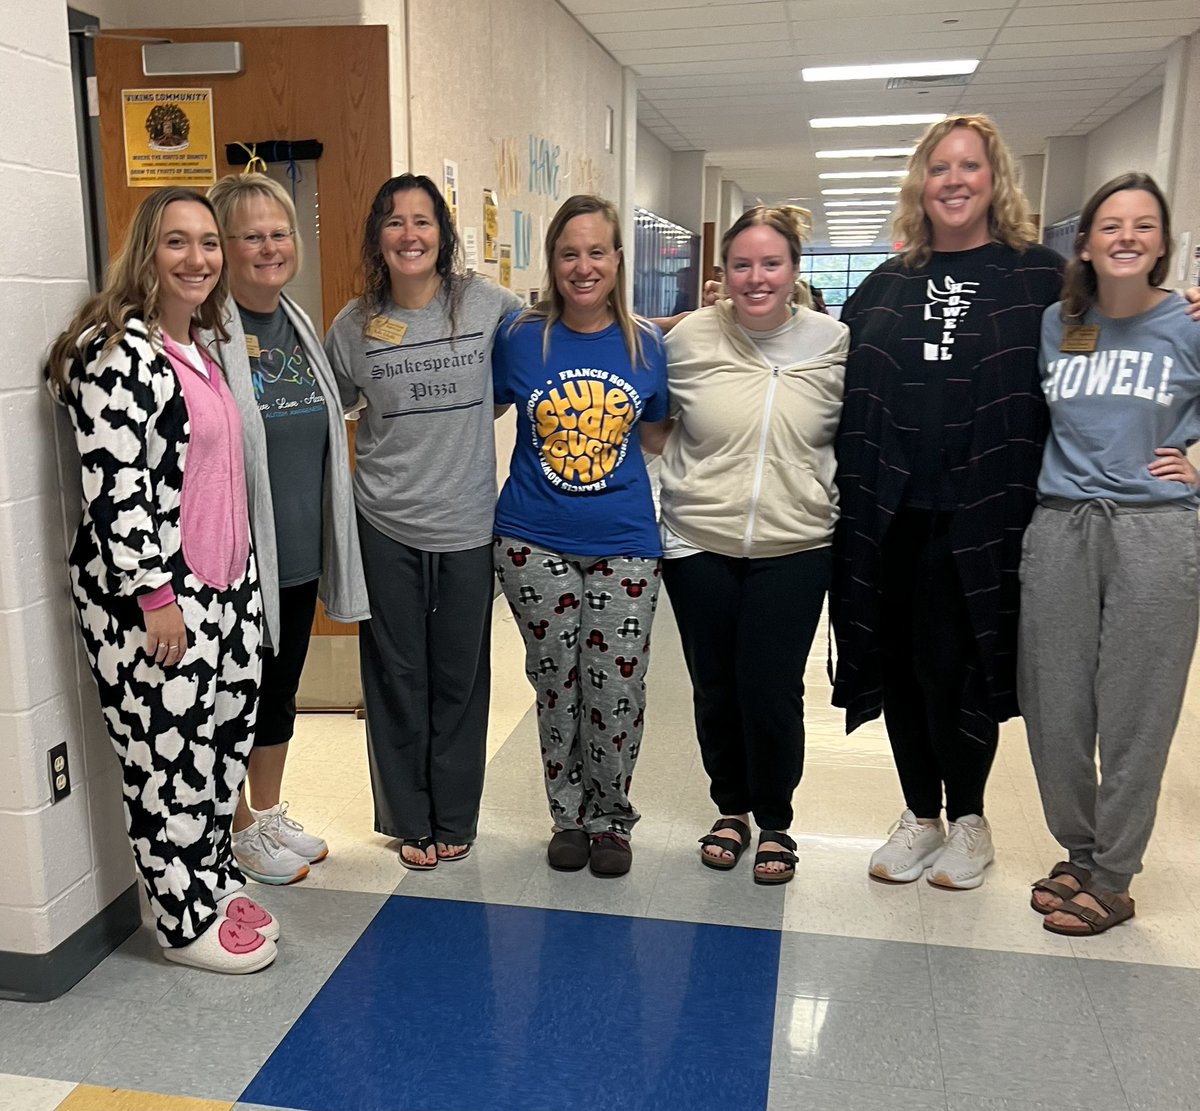 Kicking off Homecoming spirit week with a bad case of the Mondays. 😴😴😴😴@fhstuco @FHVikings @FHHSPrincipal